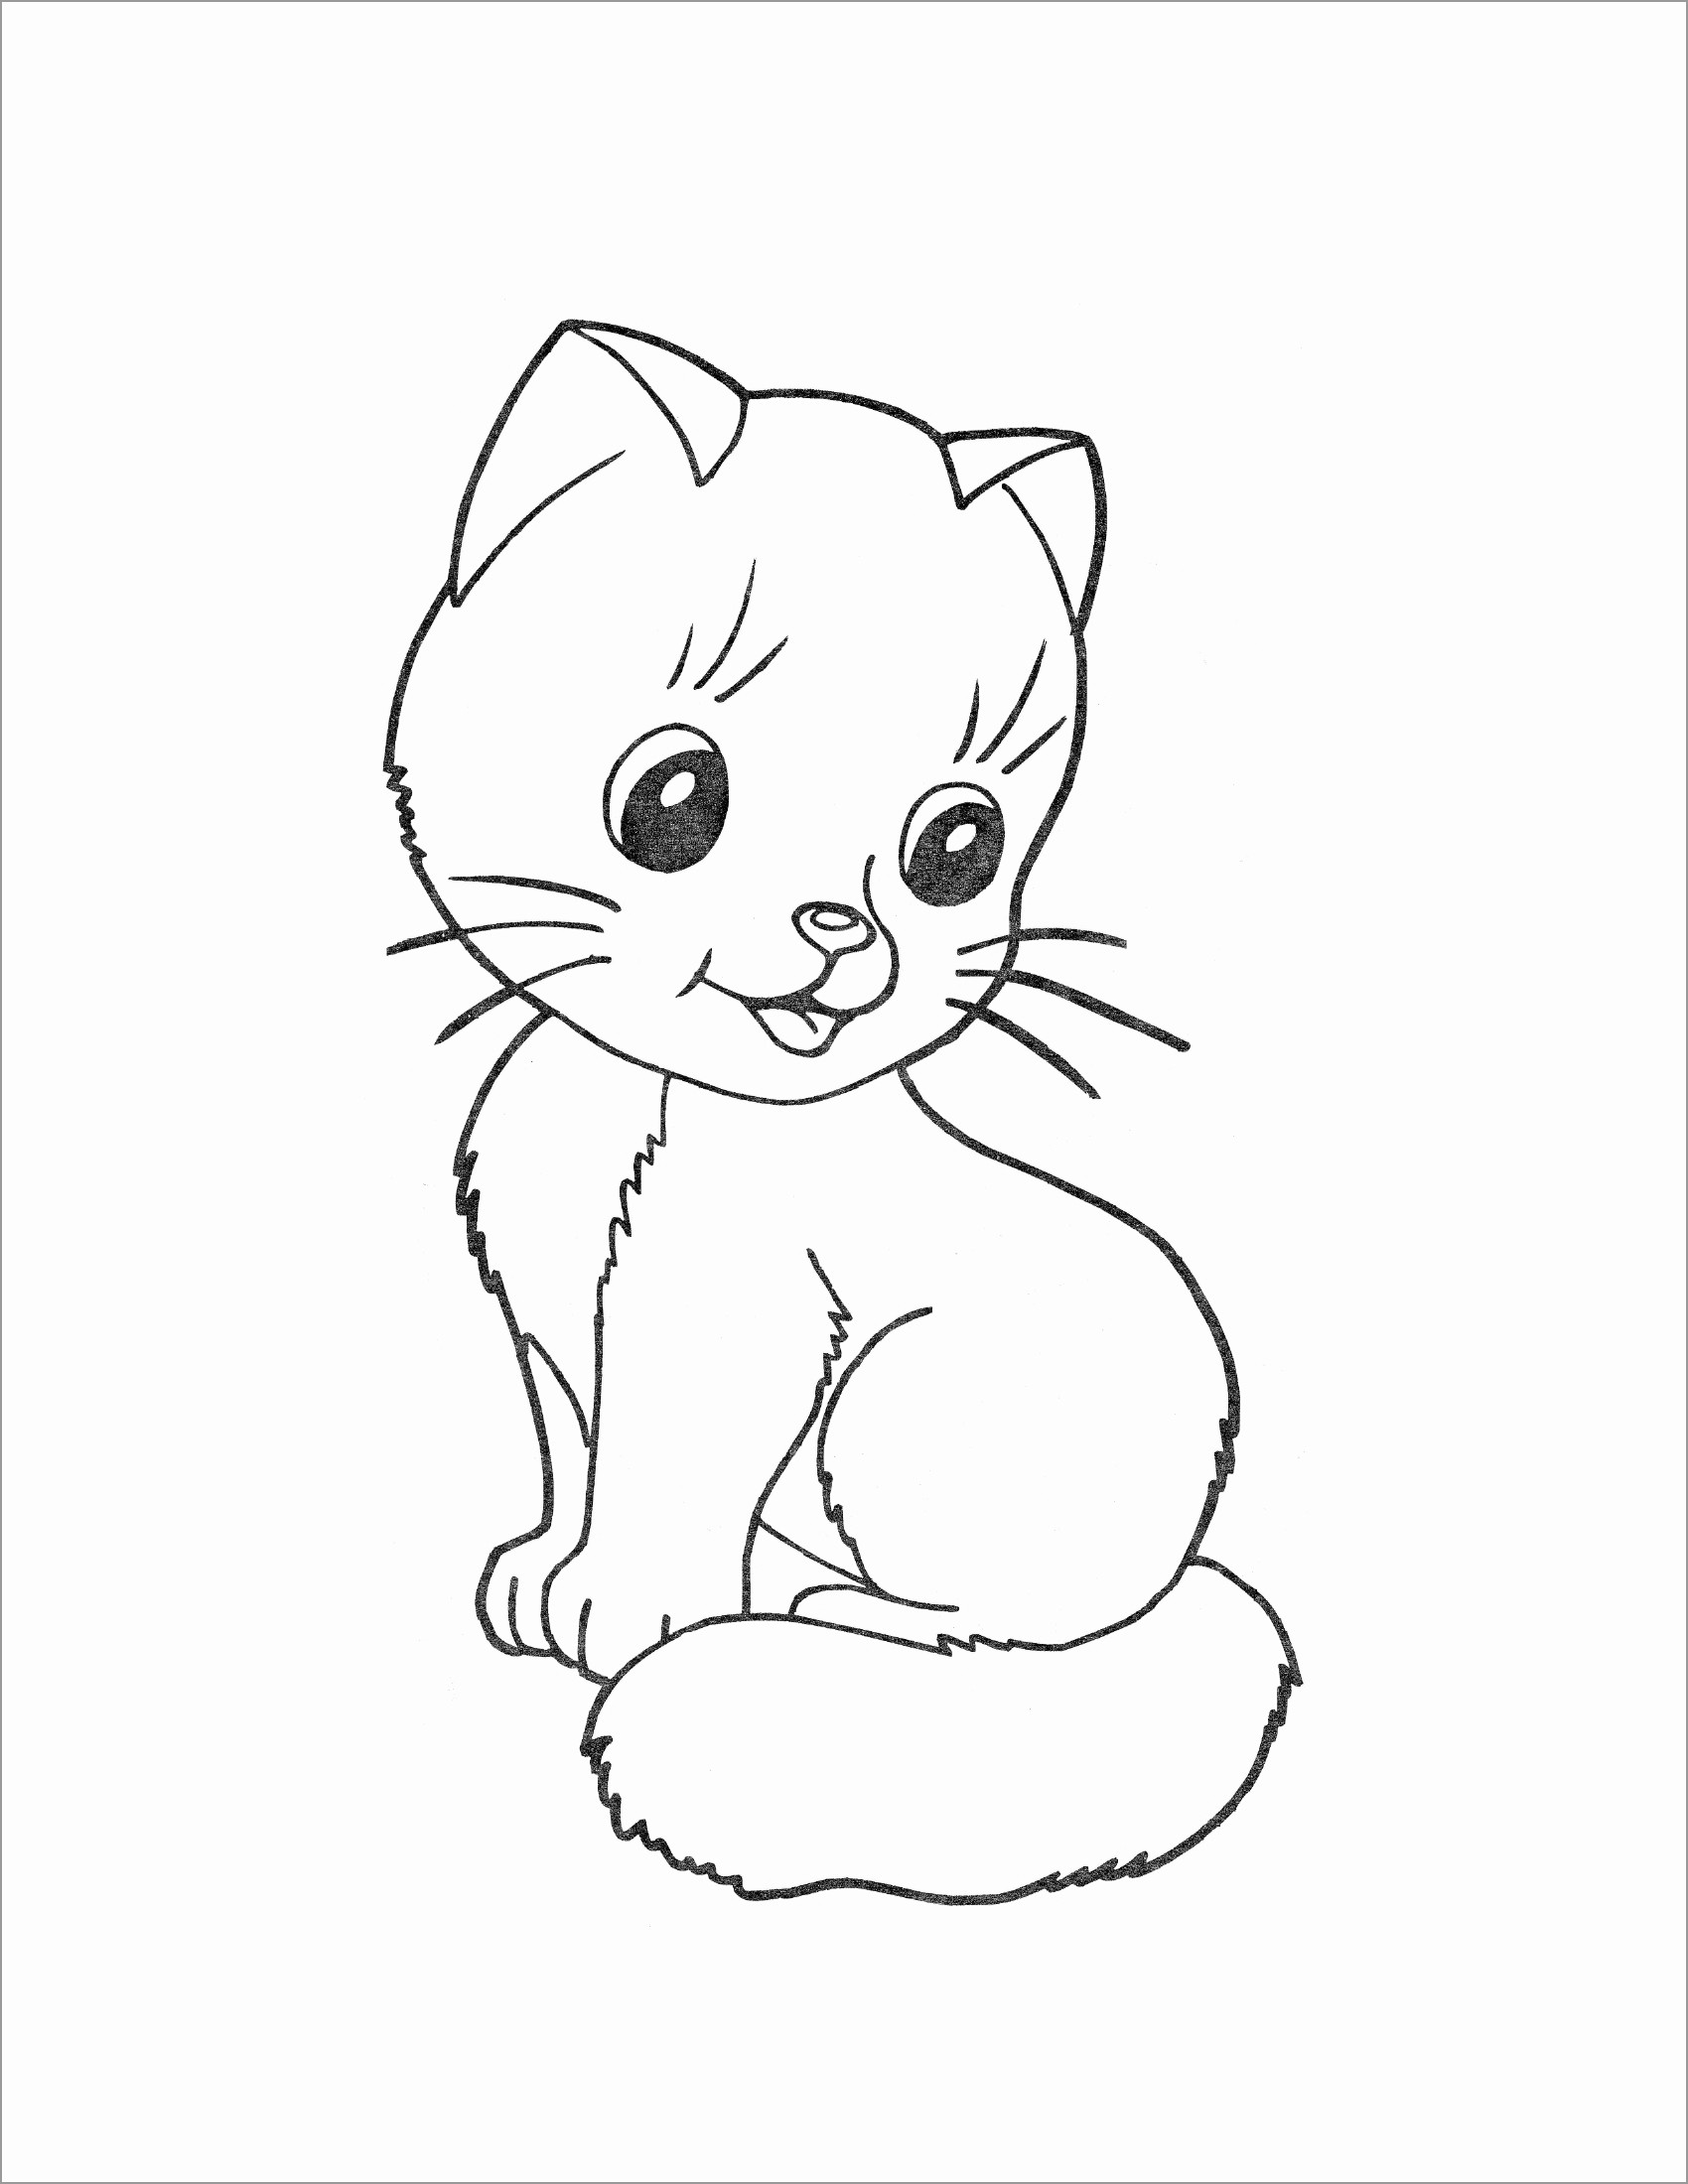 Baby Cat Coloring Page